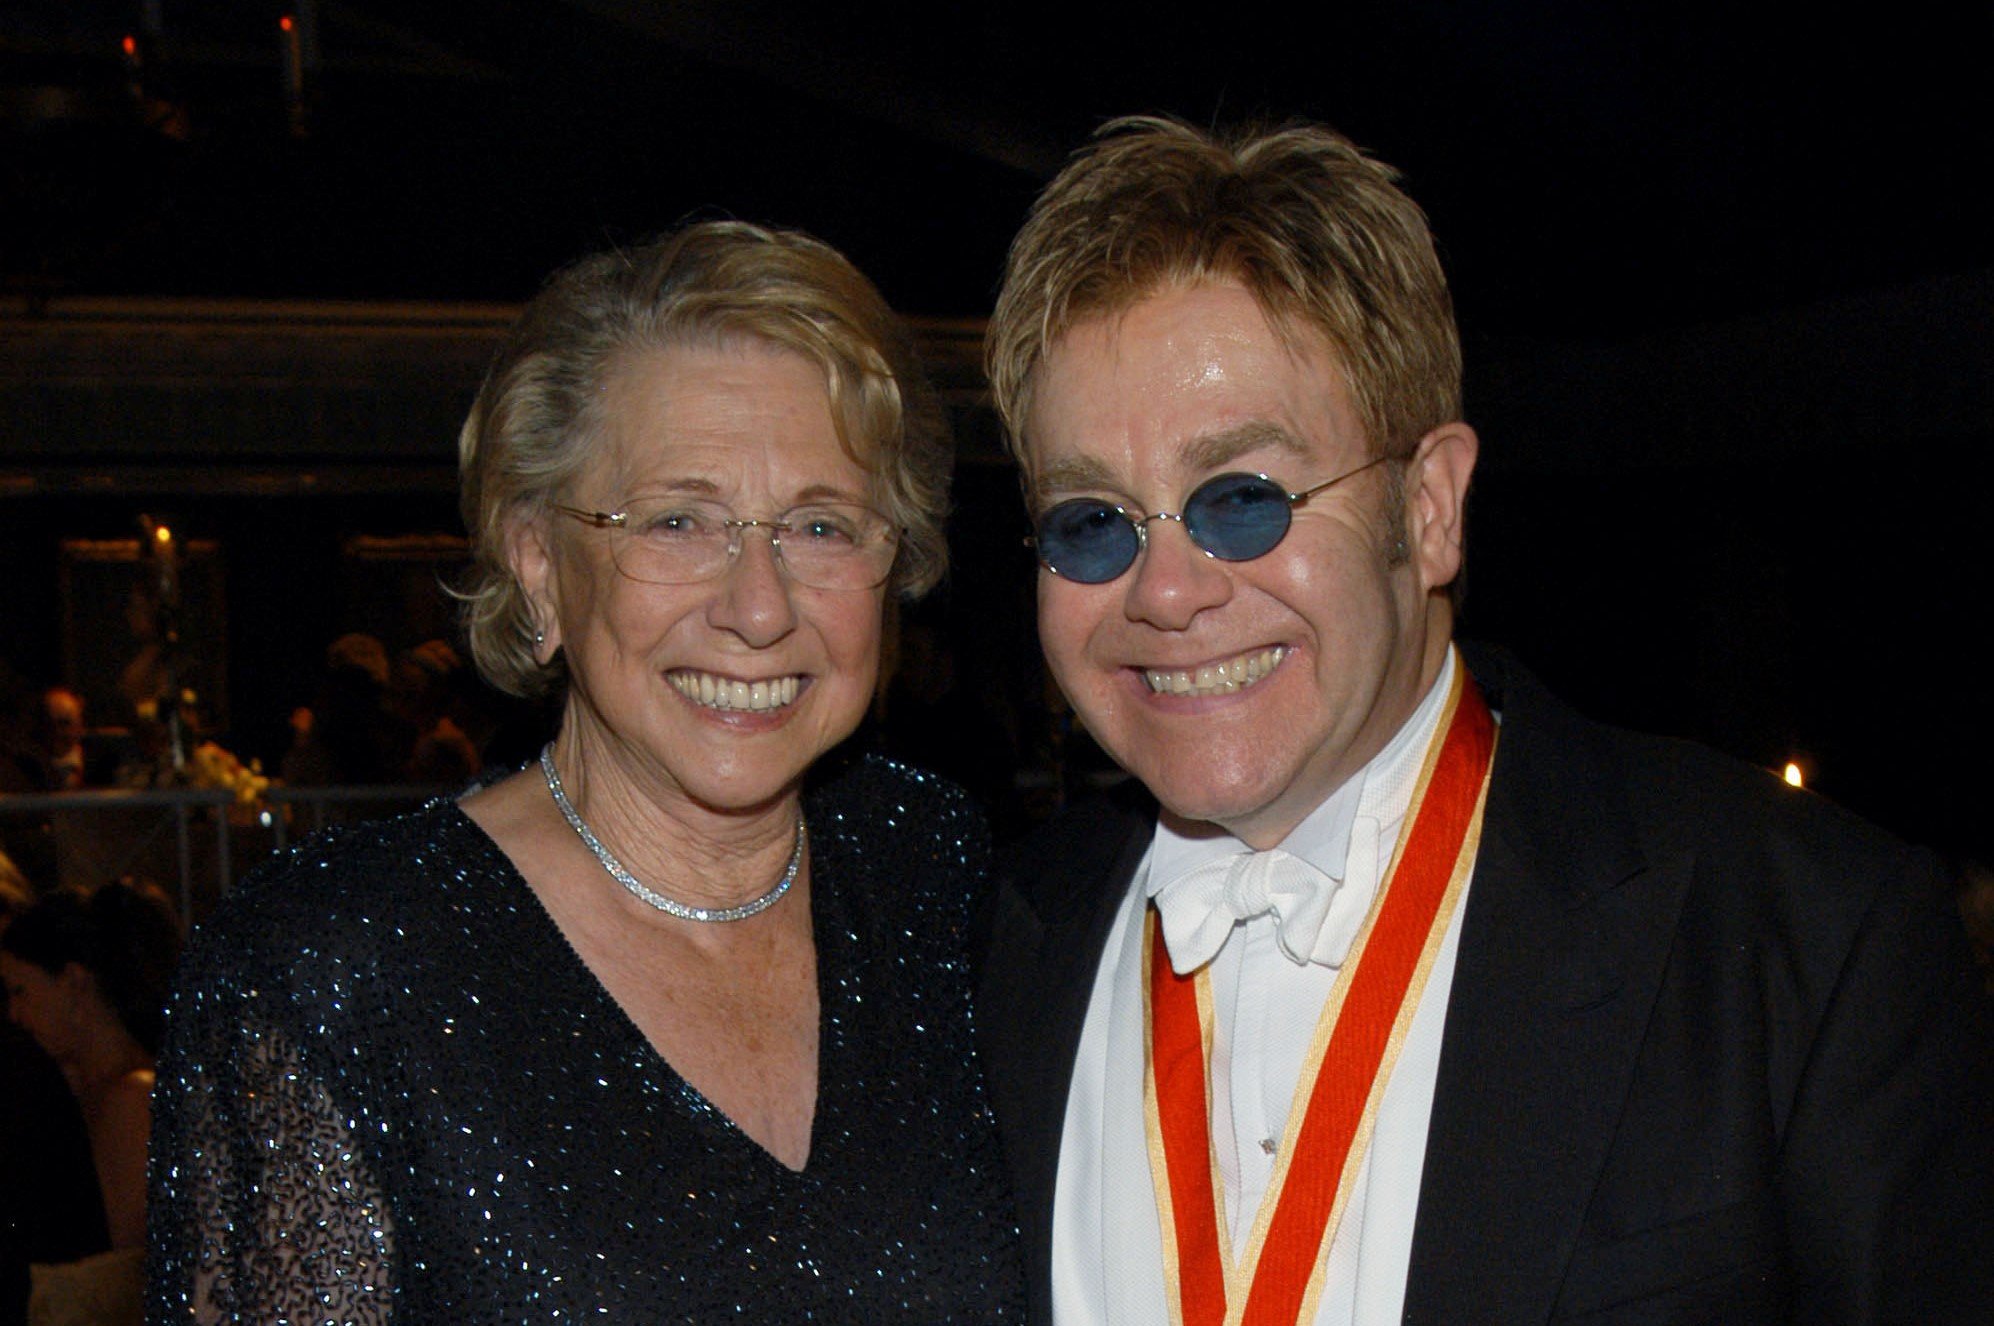 Elton John and his mom pose smiling together. Elton John's mom wears a black sparkling dress and he wears a tuxedo and sunglasses.